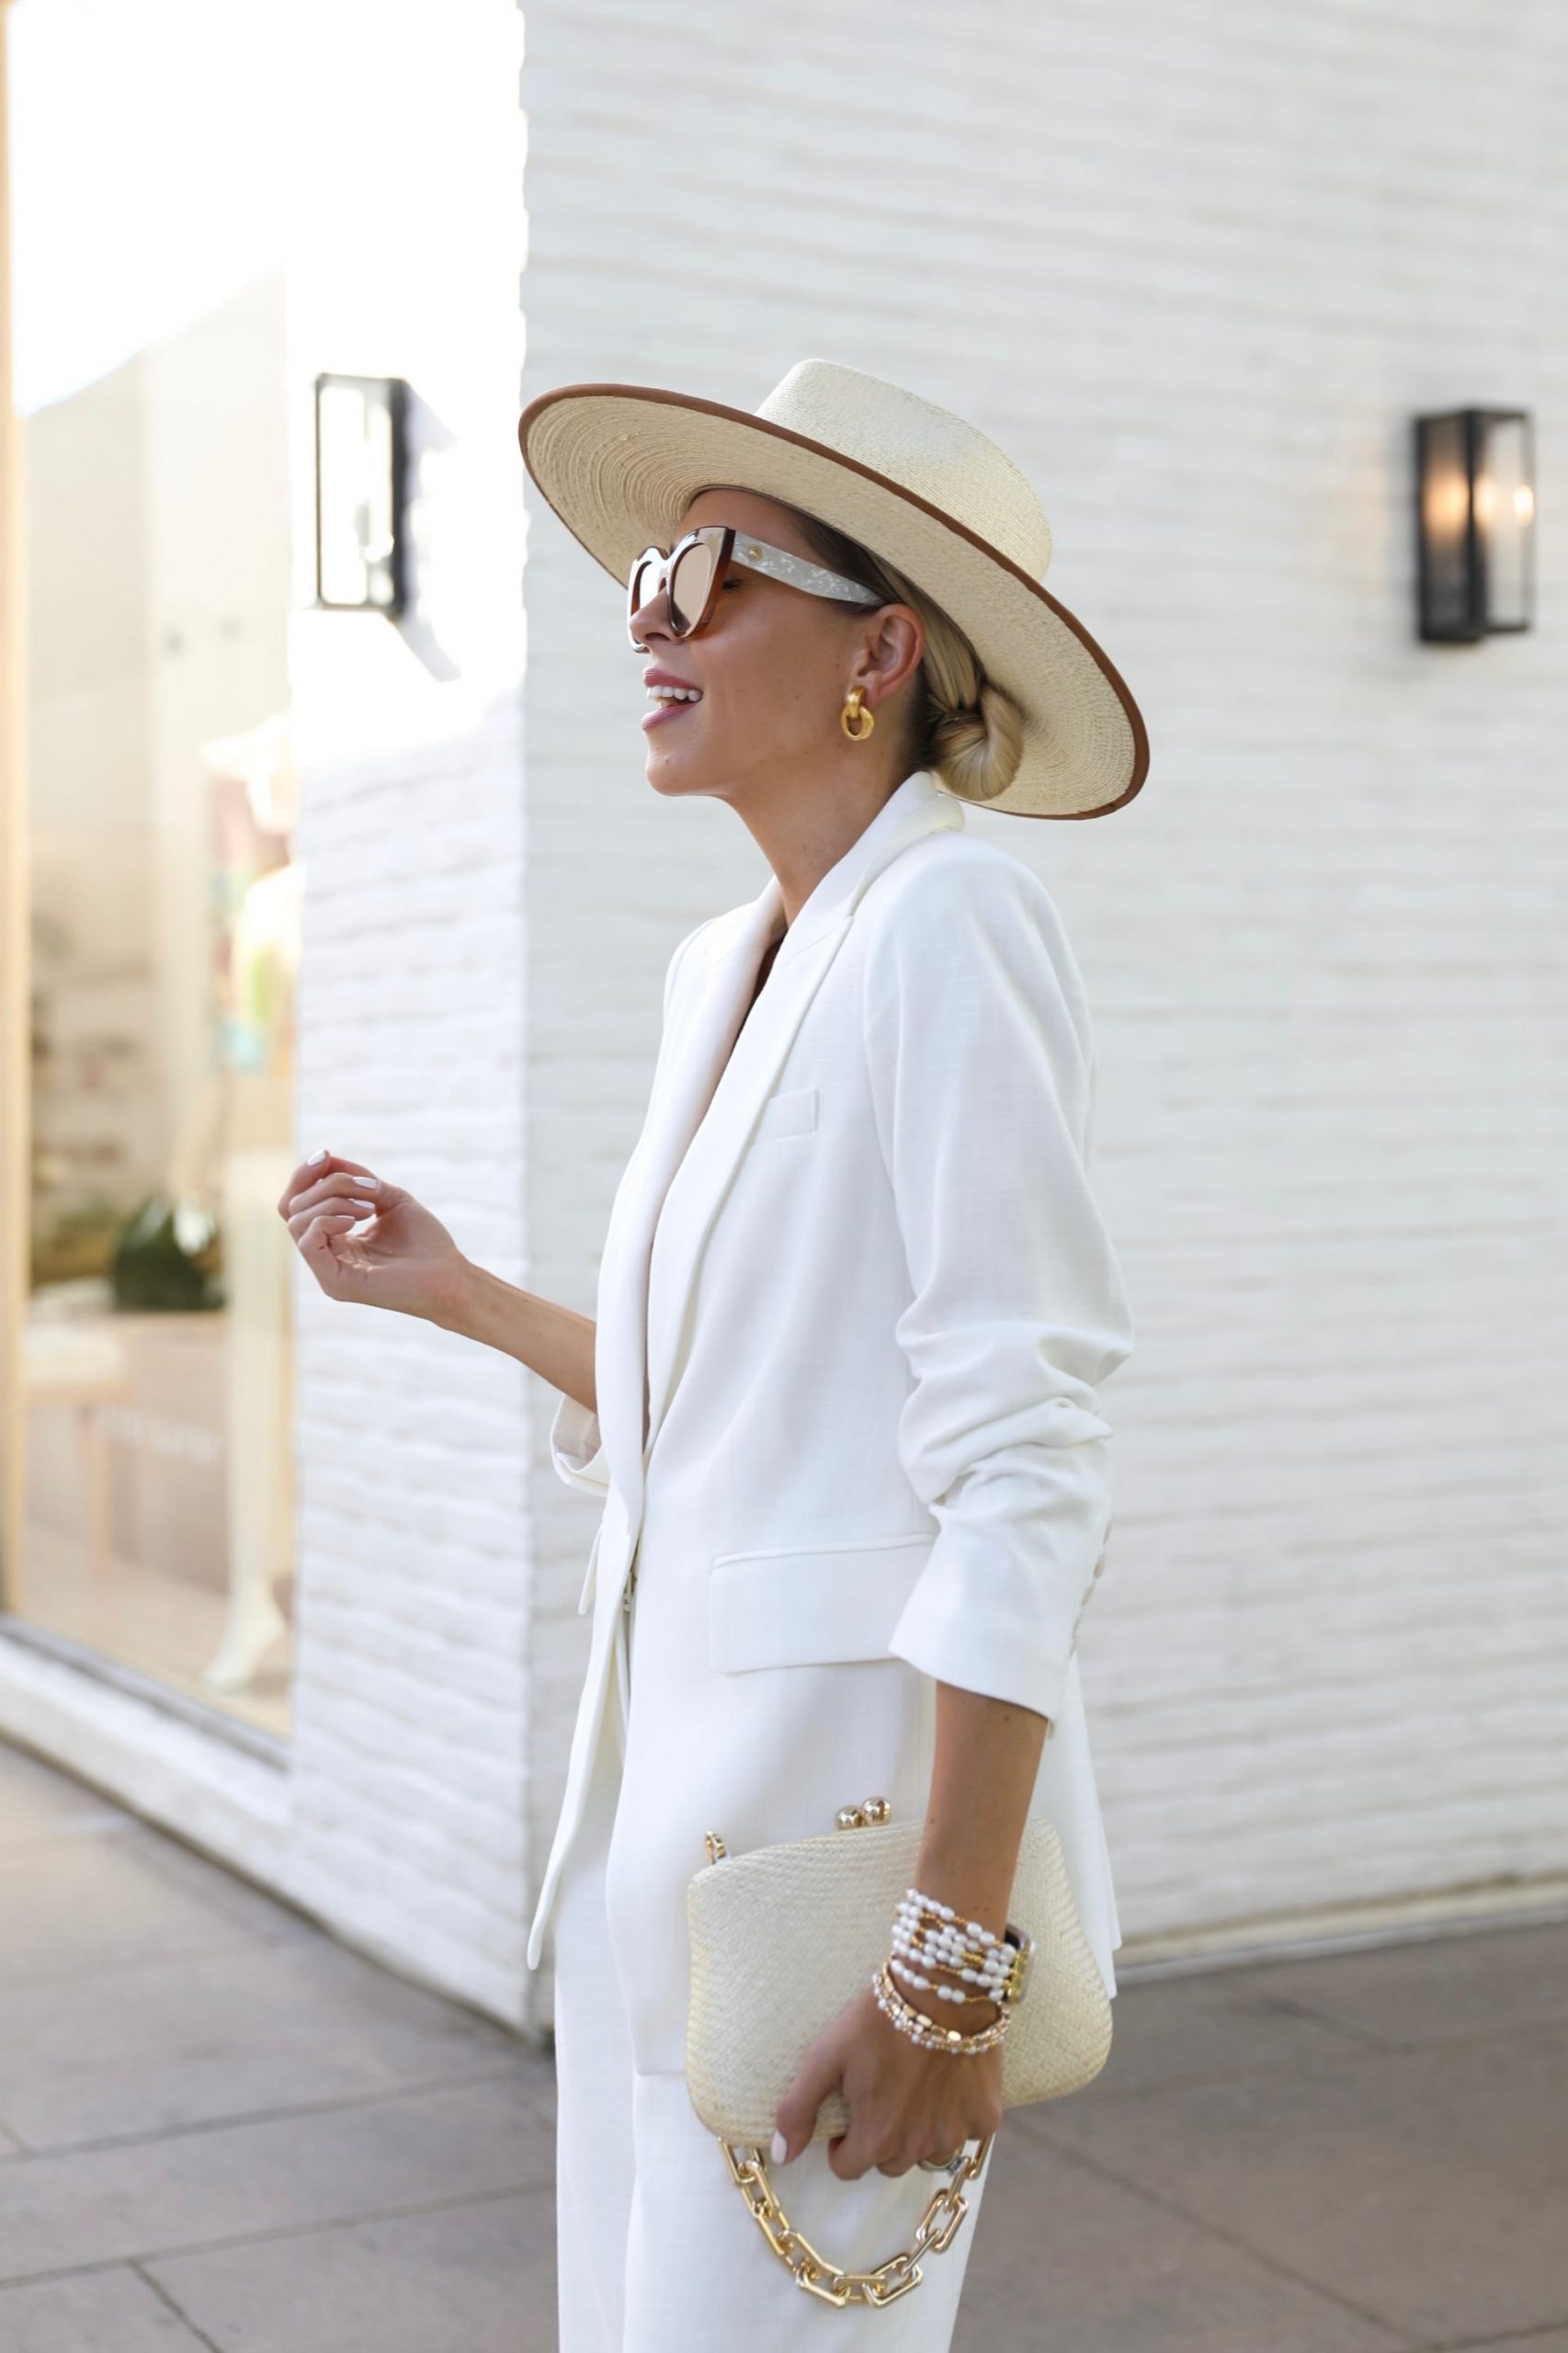 Styling favorite white pieces for pre-fall, styling white inspiration by Veronica Levy Lombard and Fifth.